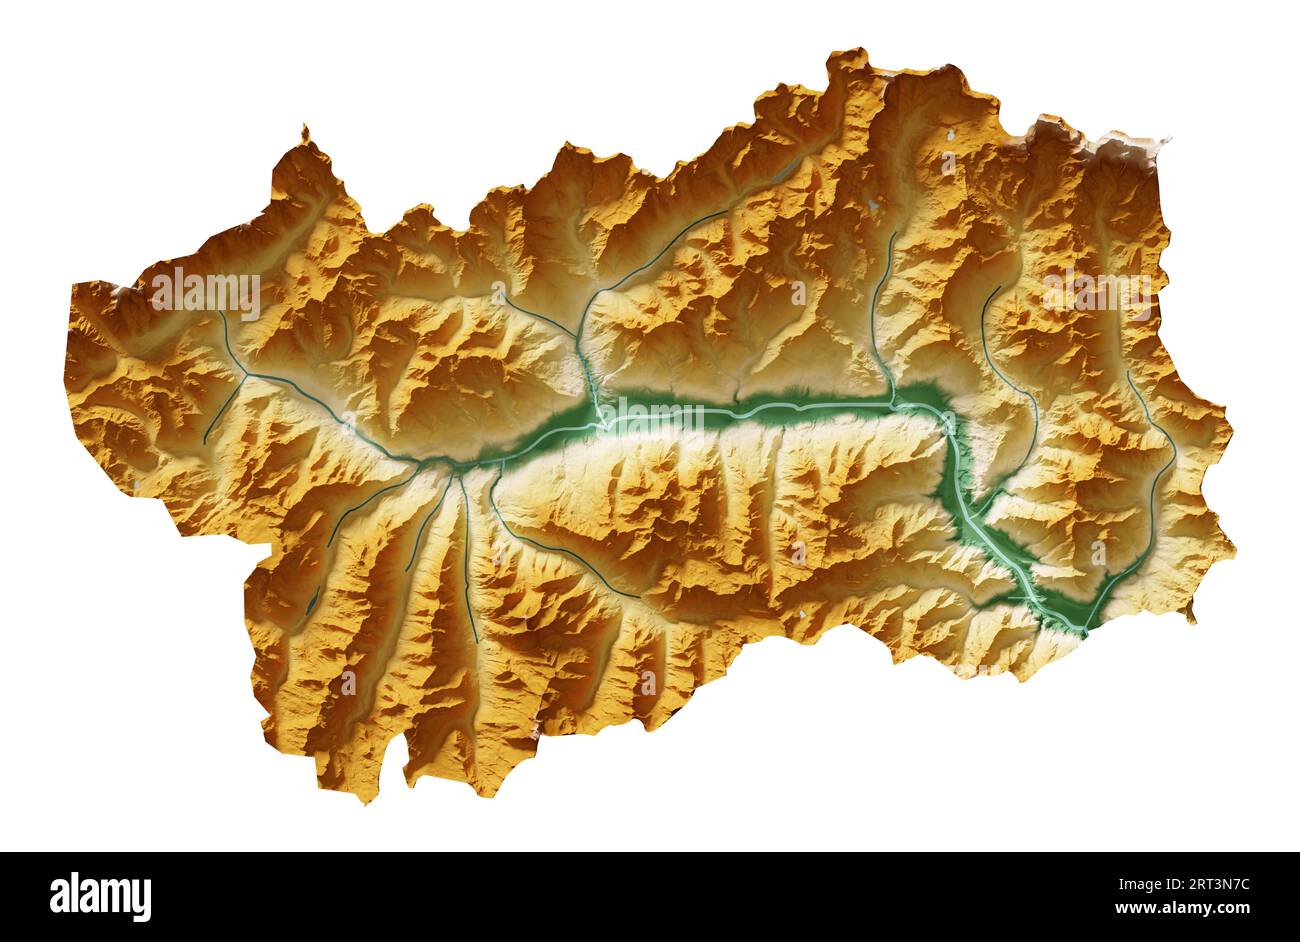 Valle d'Aosta. A region of Italy. Detailed 3D rendering of a shaded relief map, rivers, lakes. Colored by elevation. Pure white background. Stock Photo